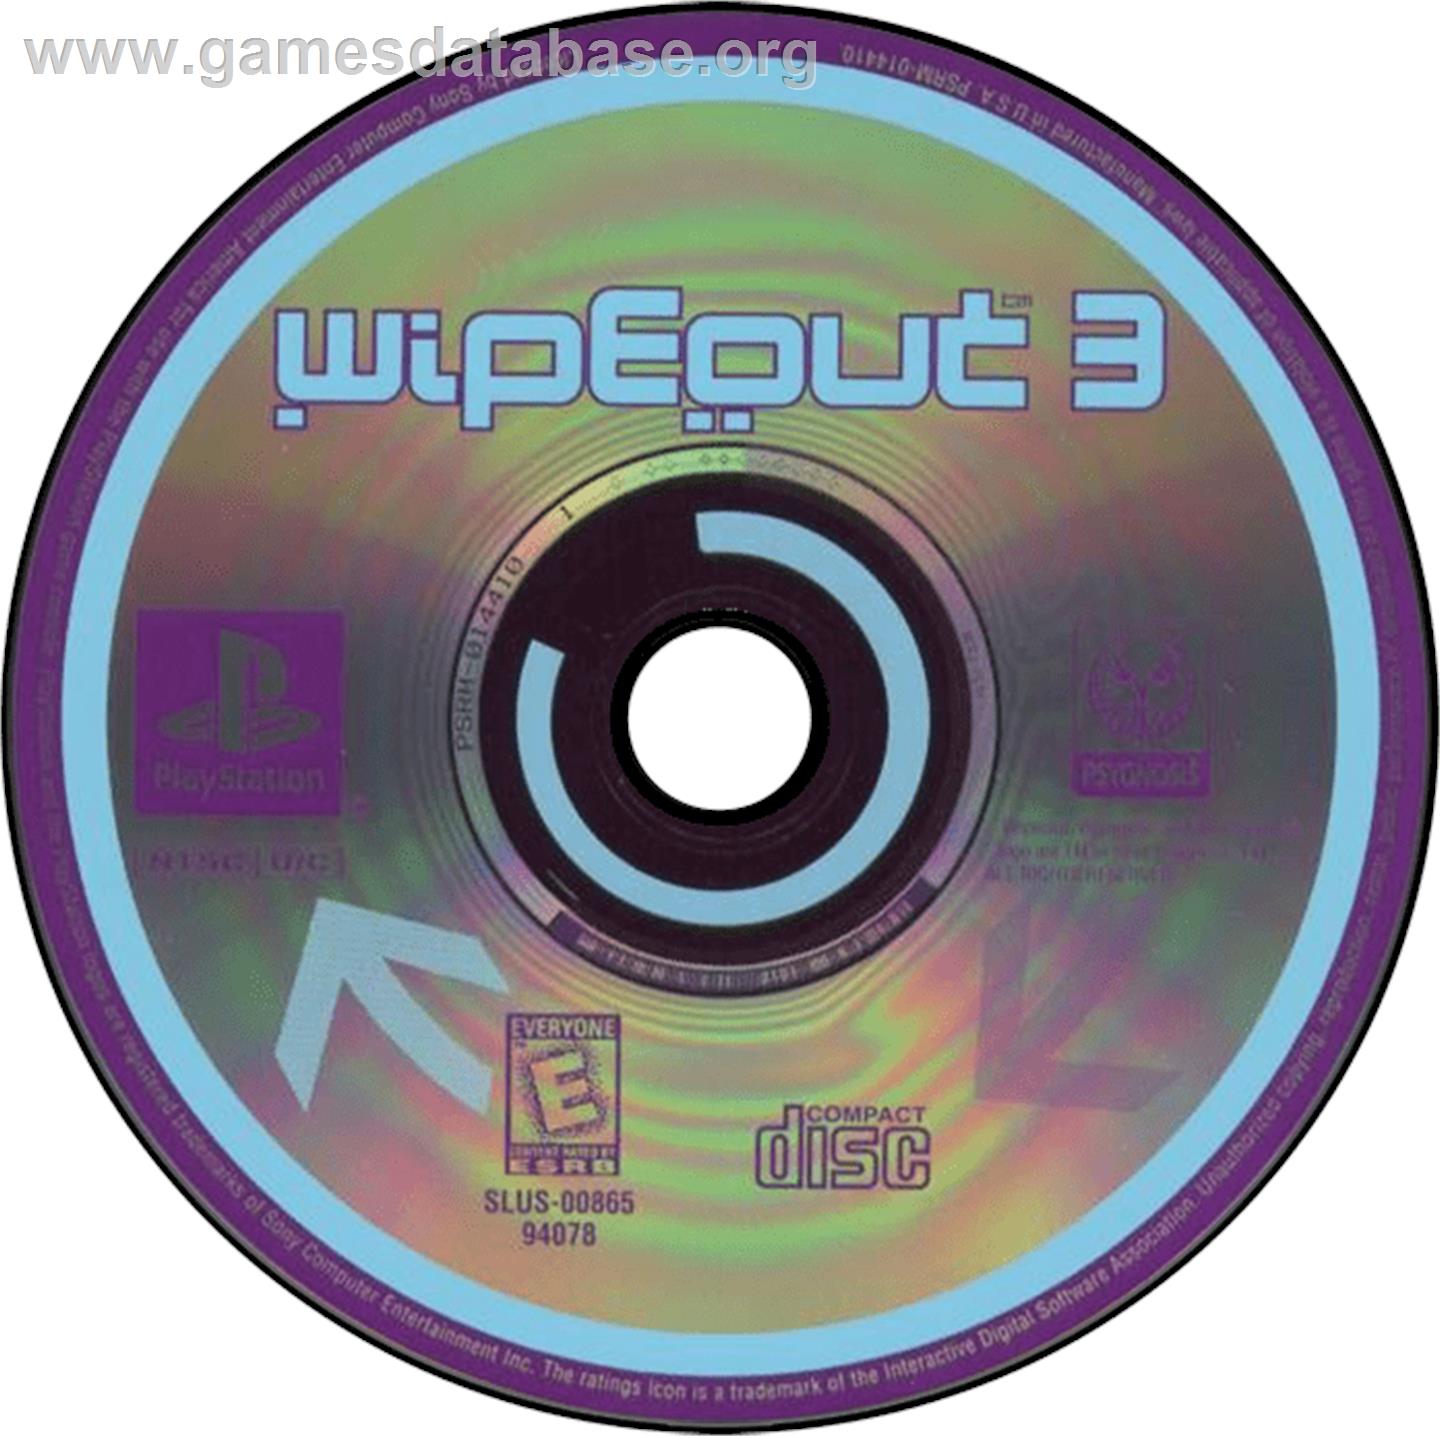 Wipeout 3 - Sony Playstation - Artwork - Disc